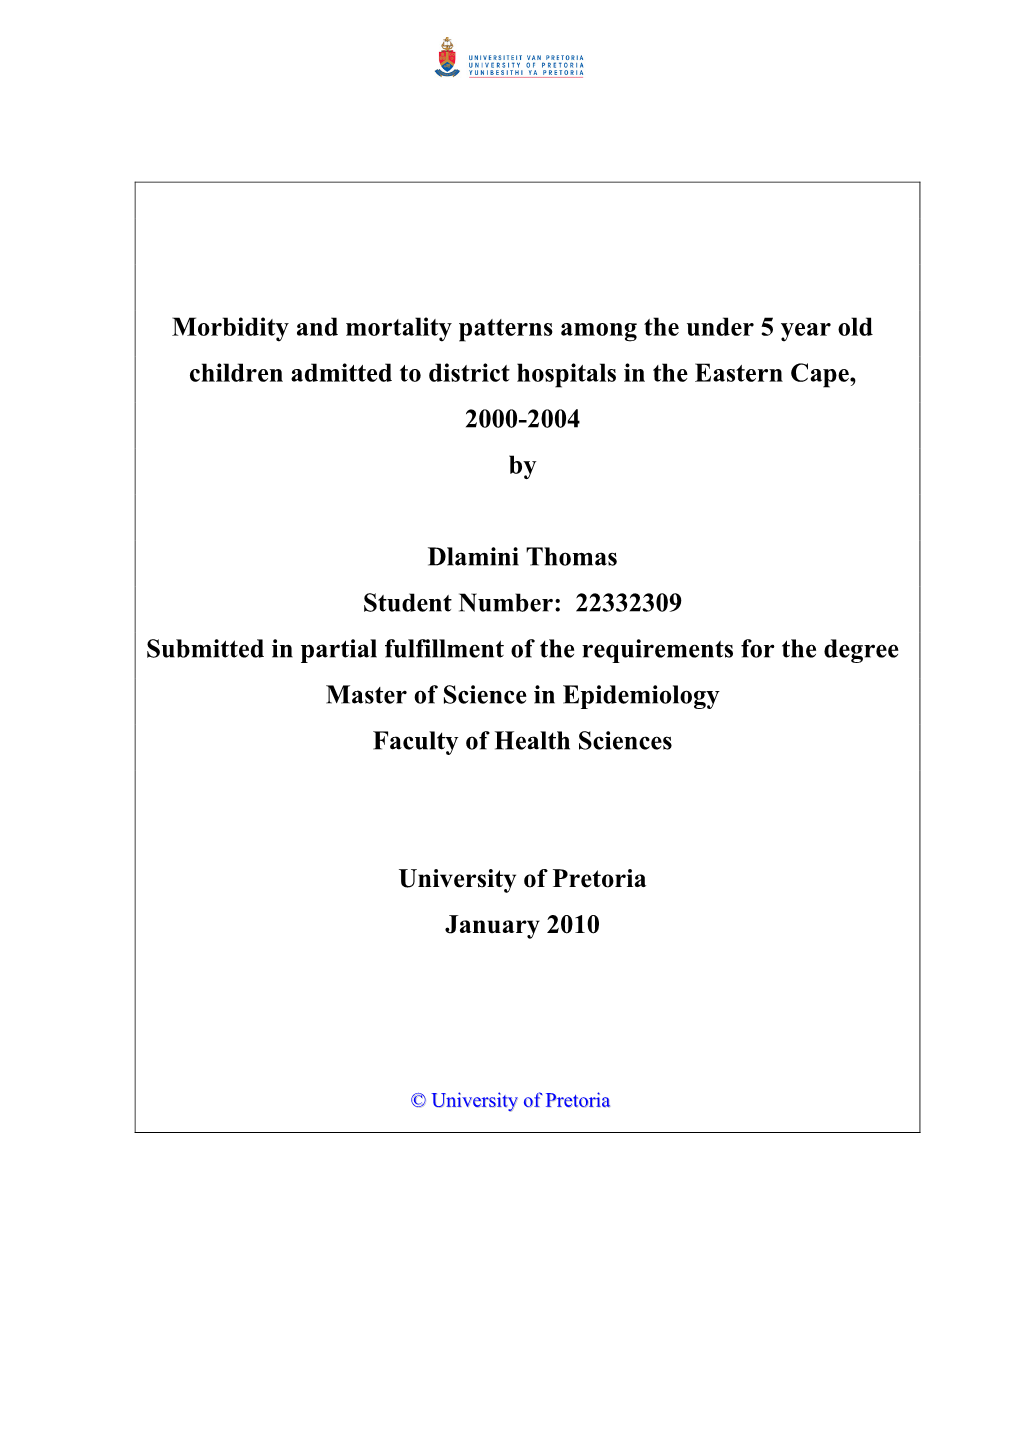 Morbidity and Mortality Patterns Among the Under 5 Year Old Children Admitted to District Hospitals in the Eastern Cape, 2000-2004 By